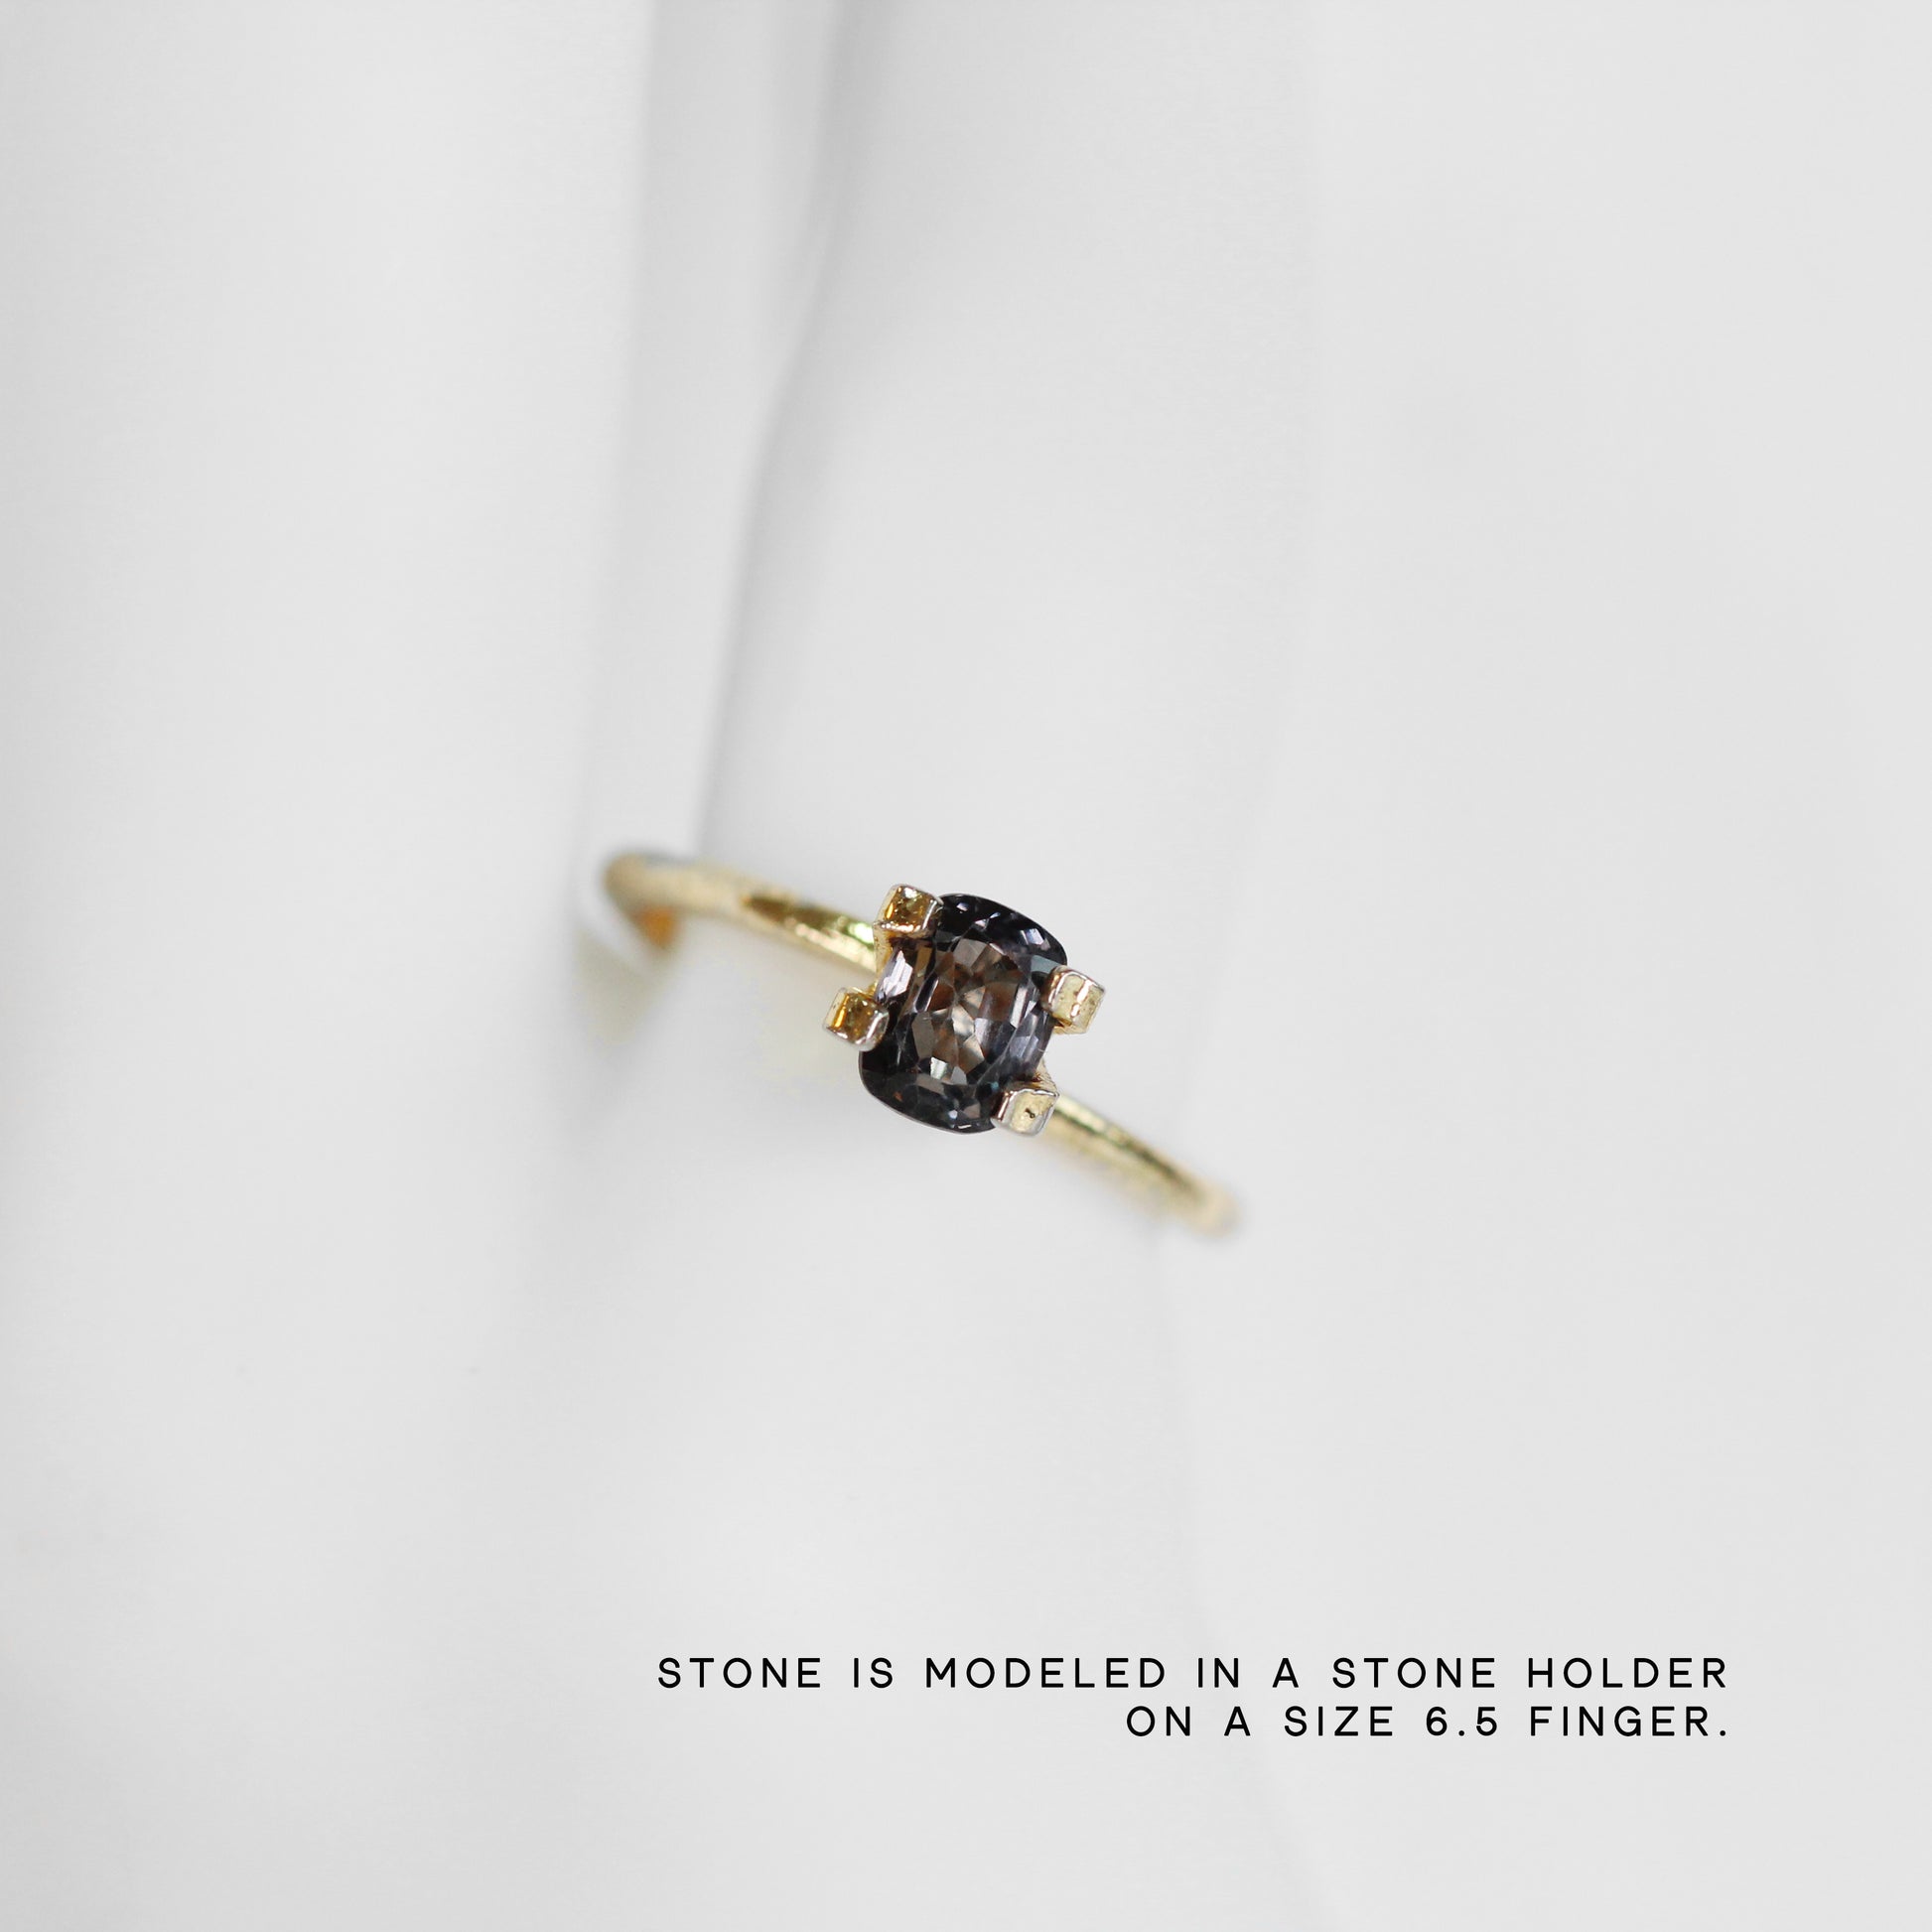 .70ct Cushion Cut Spinel for Custom Work - Inventory Code SP6.4 - Midwinter Co. Alternative Bridal Rings and Modern Fine Jewelry